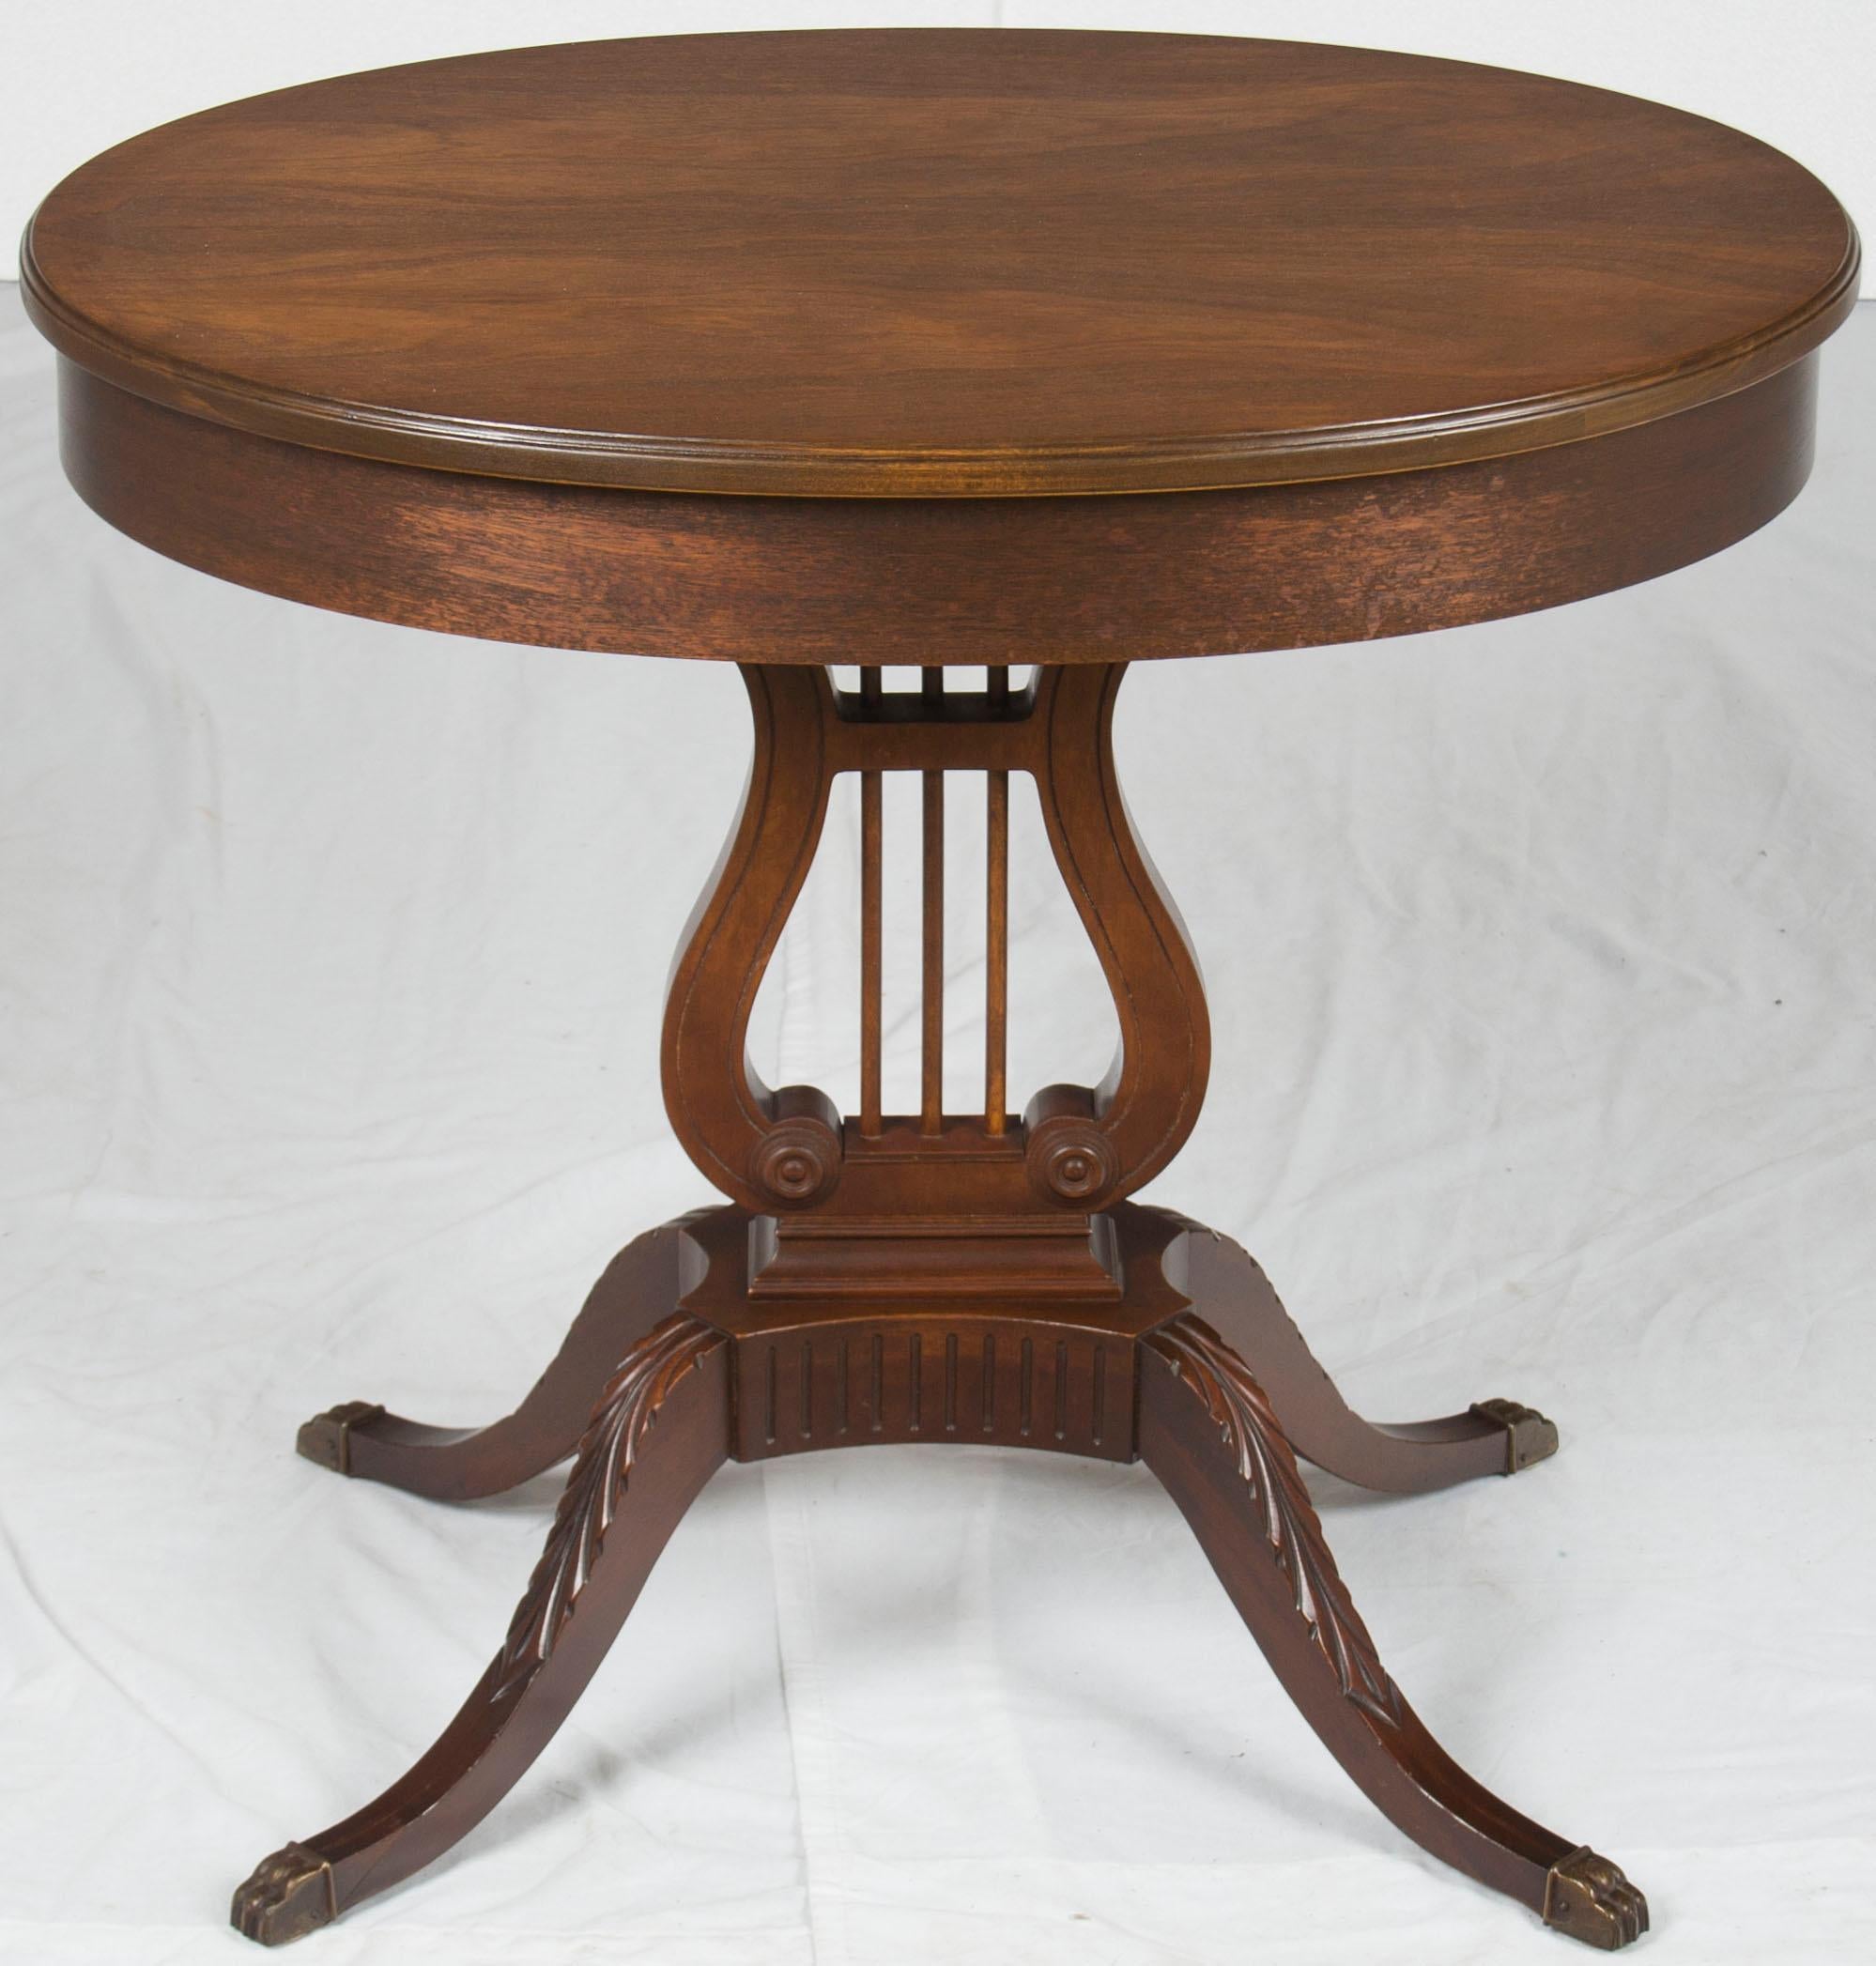 American, this mahogany accent table features a medium brown, smooth finish in very good condition. The spacious oval table top transitions beautifully to the lyre shaped trestle and splayed legs. The splayed legs are connected by a platform that